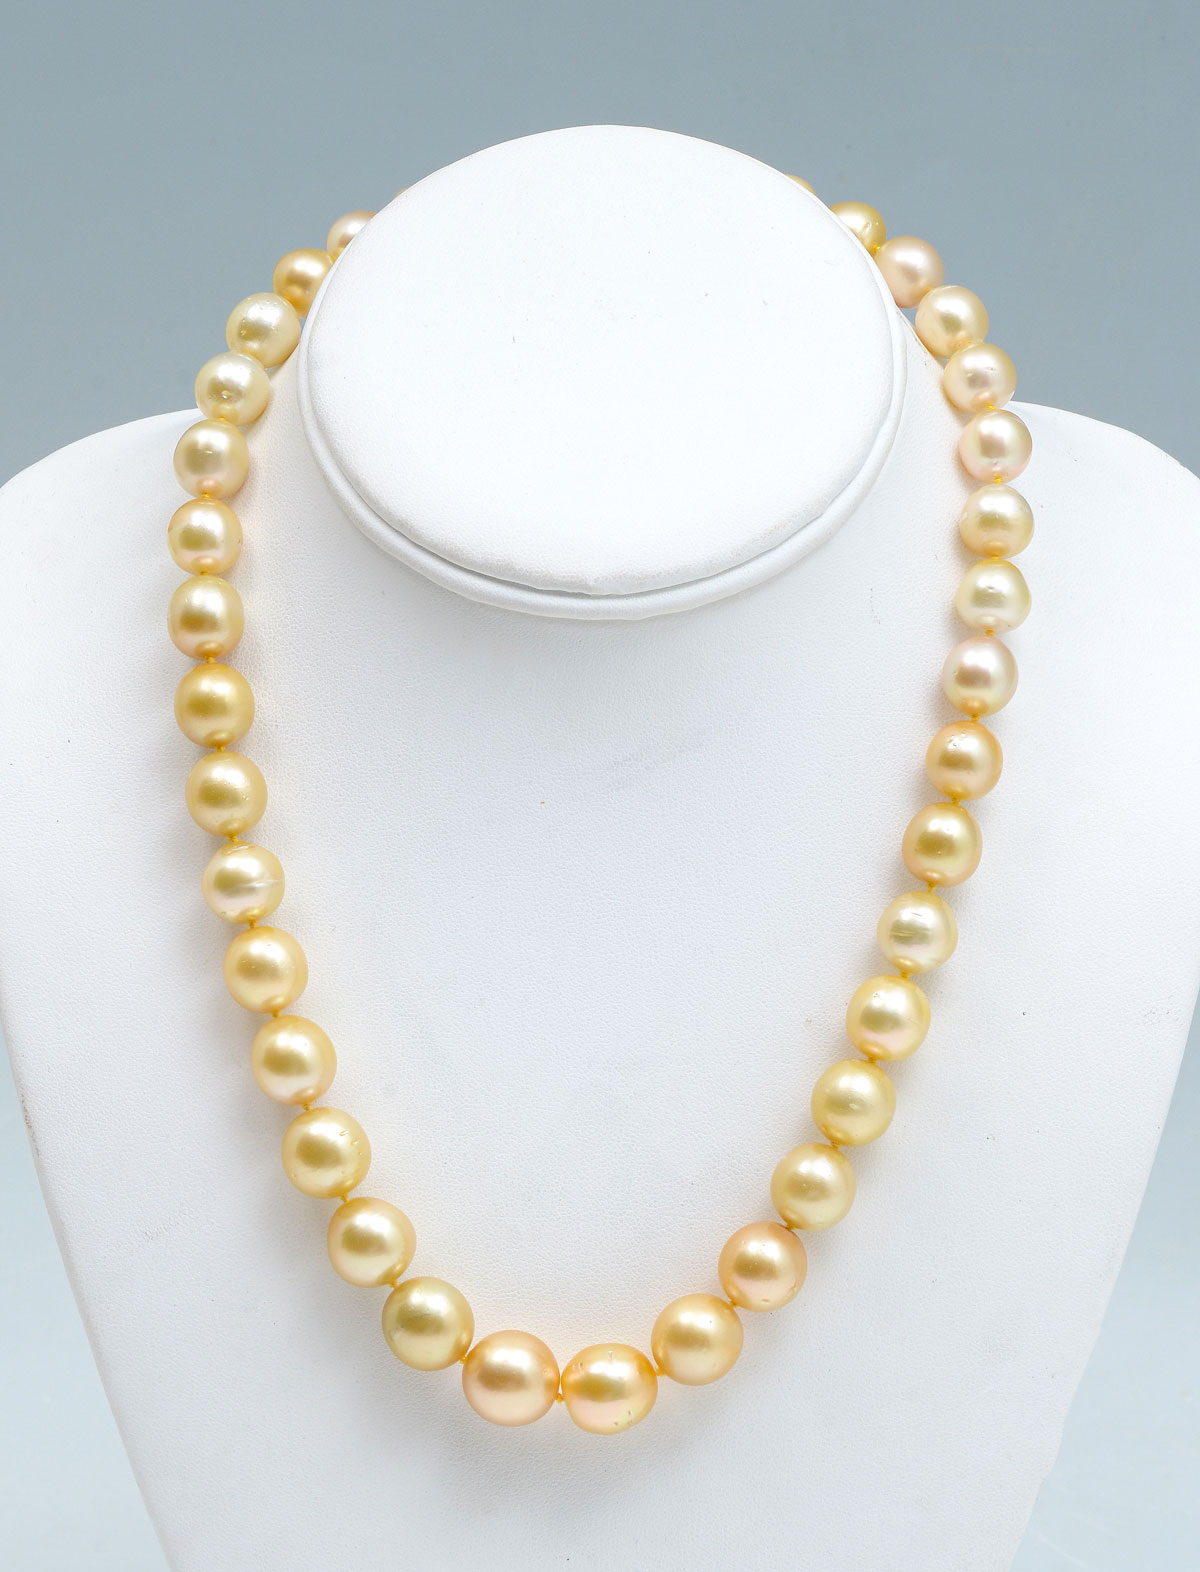 GOLDEN SOUTH SEA PEARL NECKLACE: